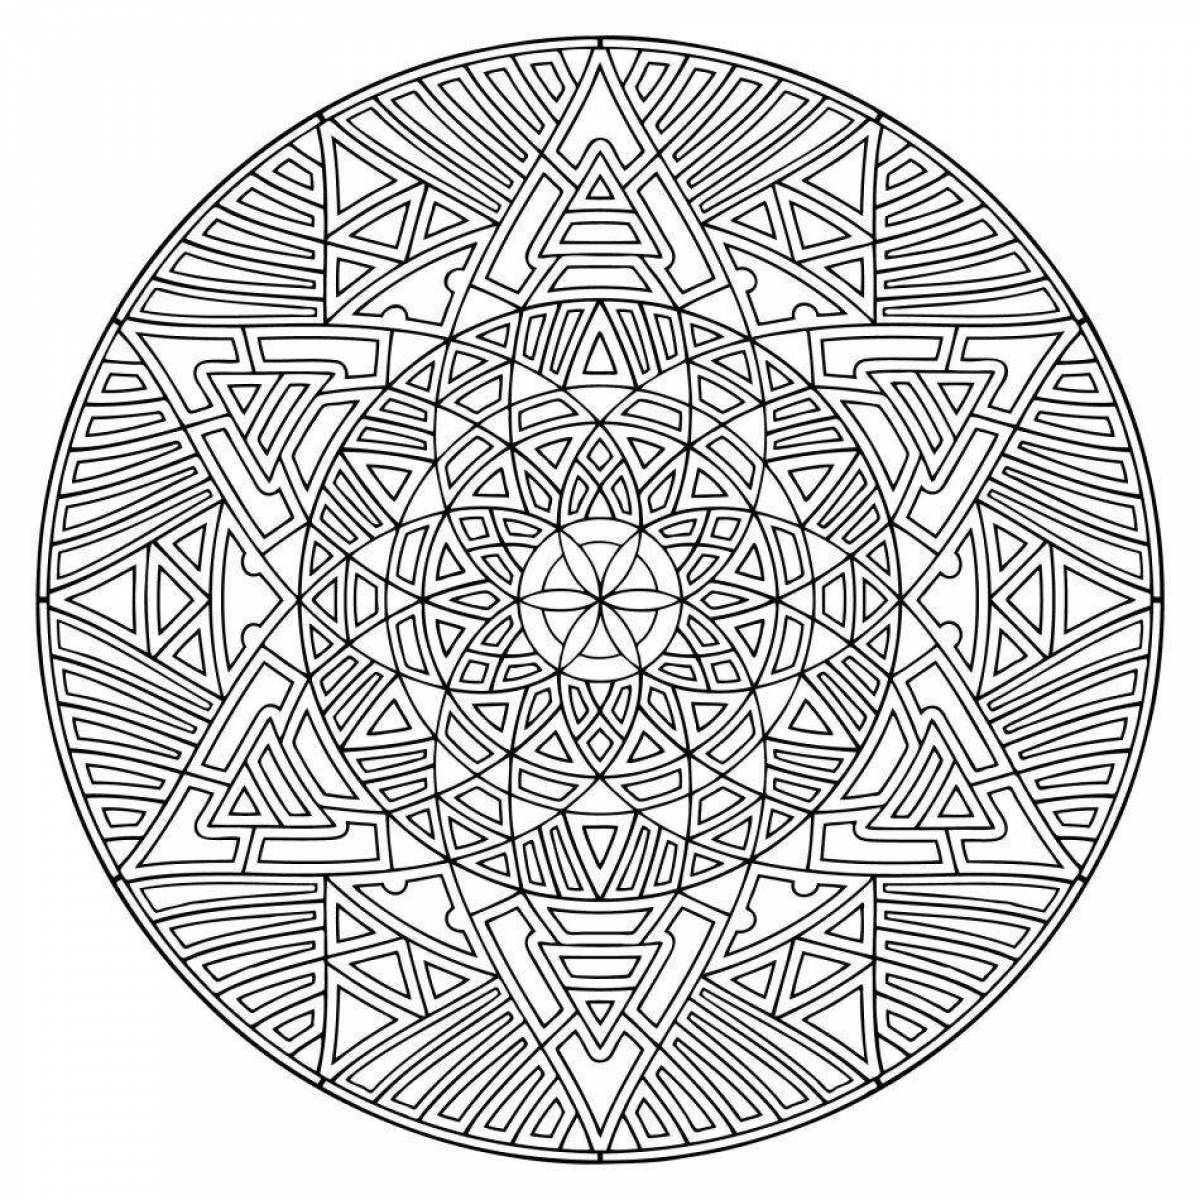 Coloring page with intricate patterns - mesmerizing